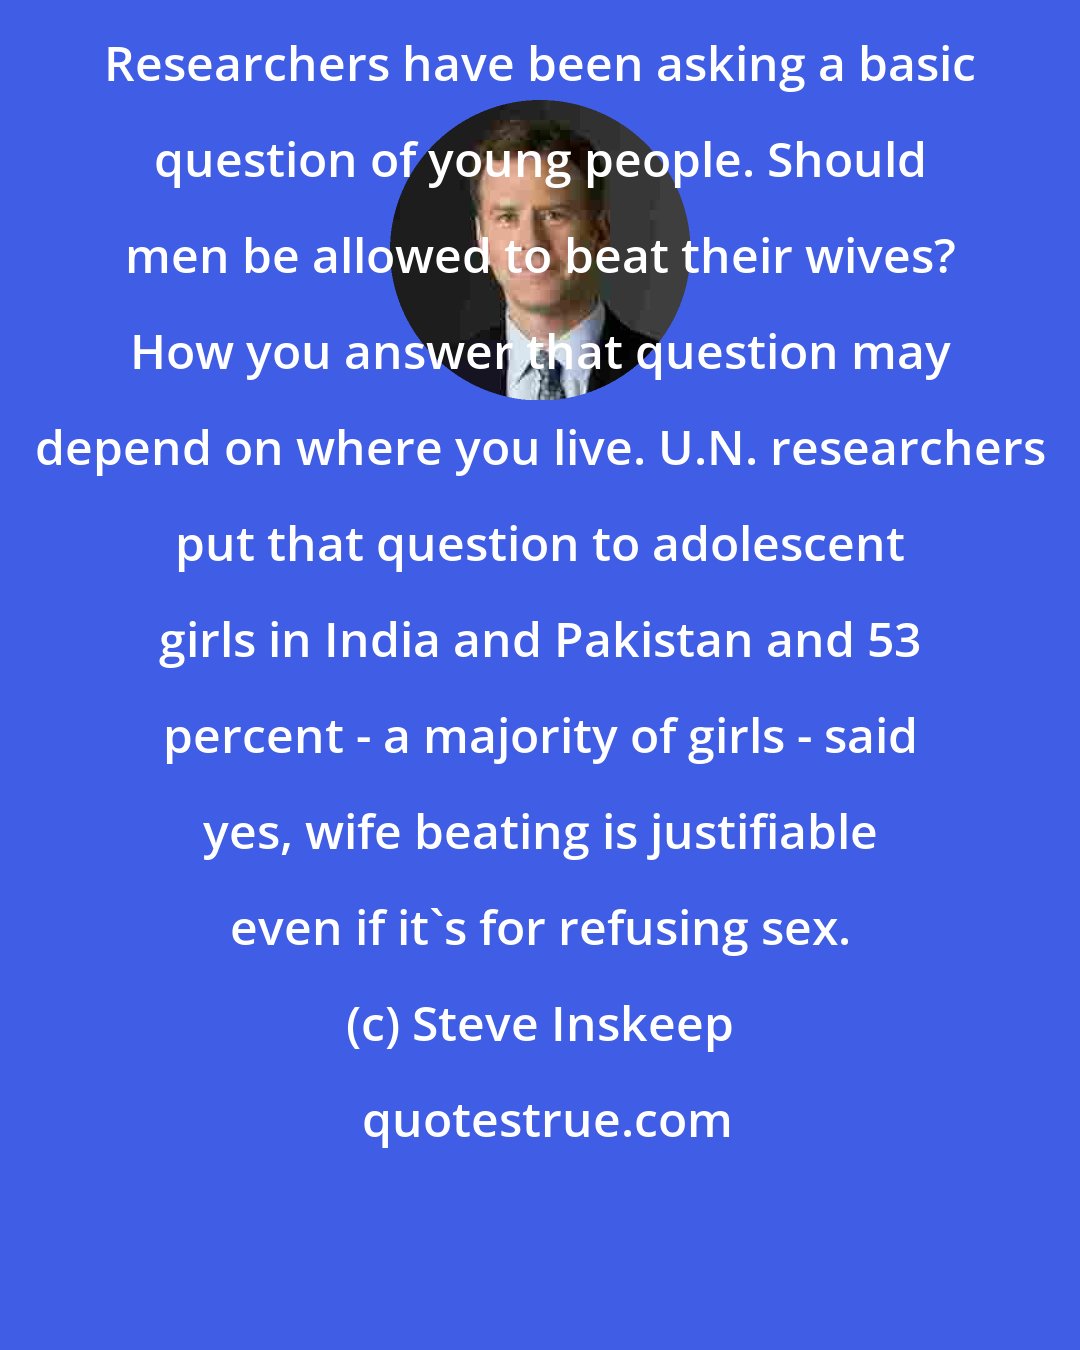 Steve Inskeep: Researchers have been asking a basic question of young people. Should men be allowed to beat their wives? How you answer that question may depend on where you live. U.N. researchers put that question to adolescent girls in India and Pakistan and 53 percent - a majority of girls - said yes, wife beating is justifiable even if it's for refusing sex.